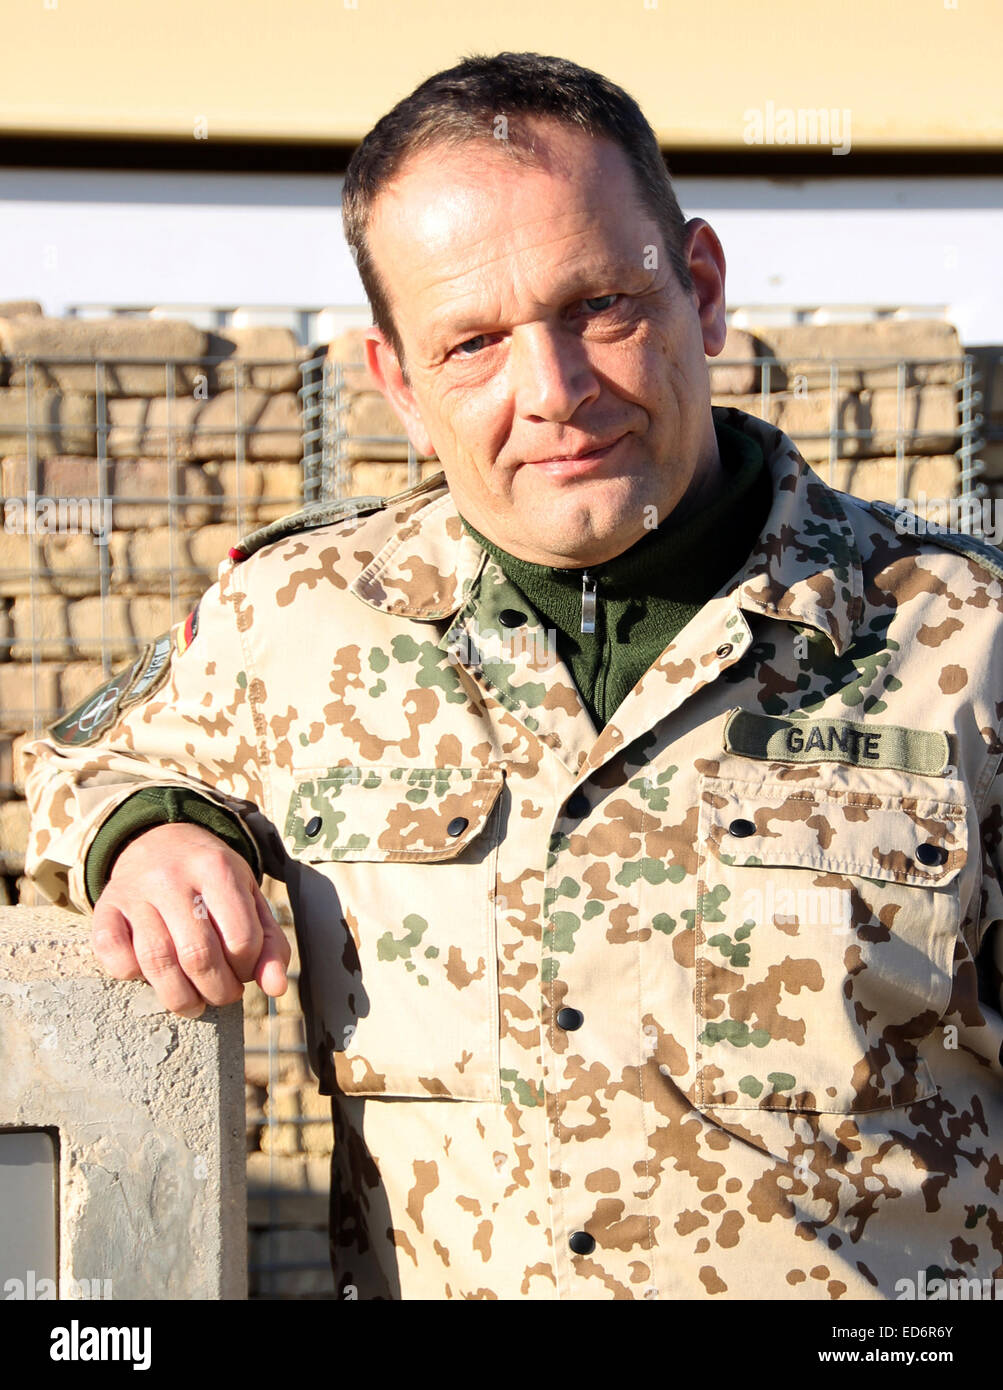 General Harald Gante, Commander of the German and international forces in Afghanistan, stands in the camp in Mazar-i-Sharif, Afghanistan, 10 December 2014. Photo: Can Merey/dpa Stock Photo